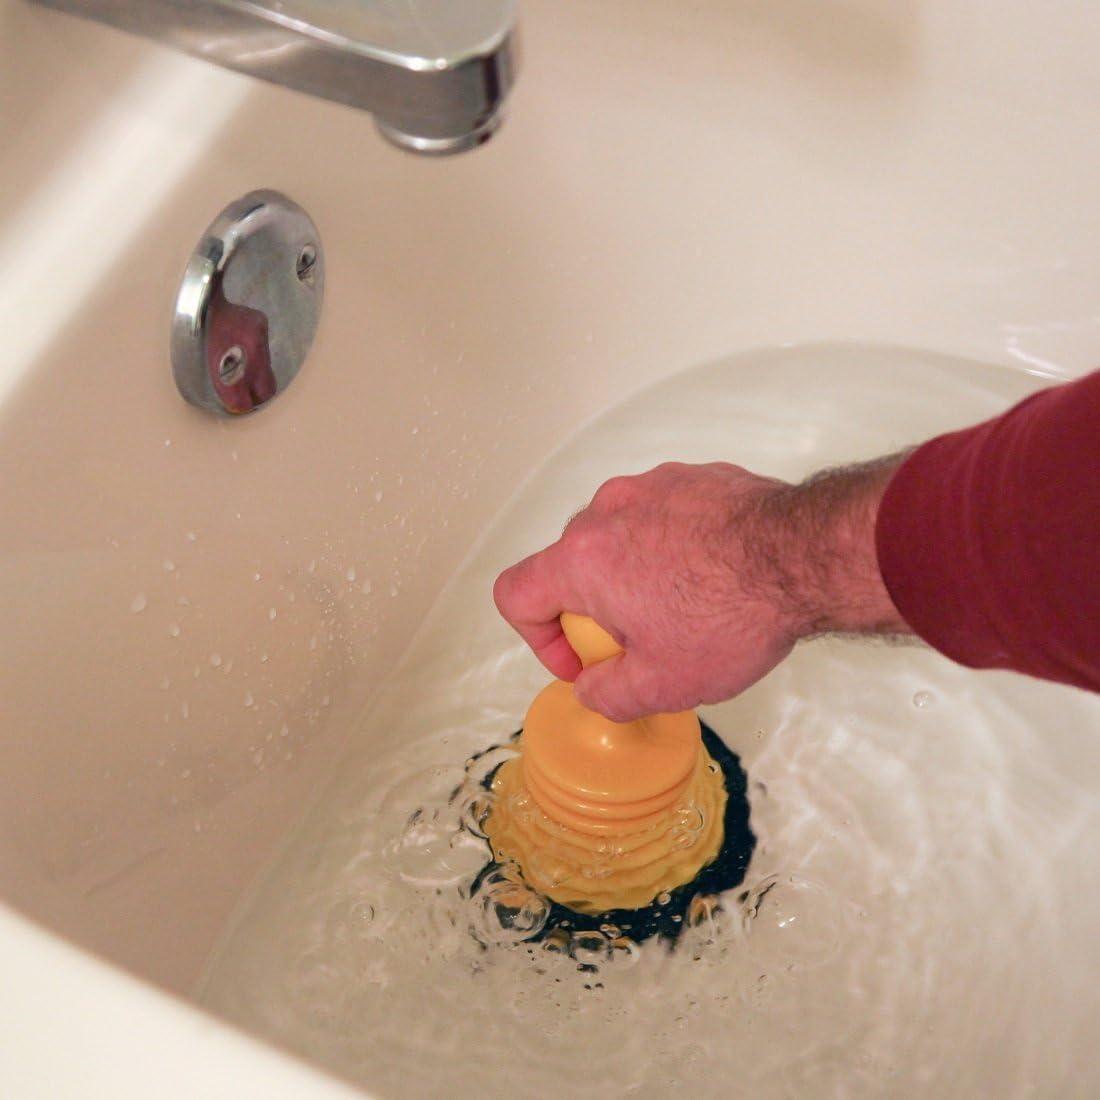 Mini Plunger for Sink Drain: Sink and Drain Powerful Small Plunger